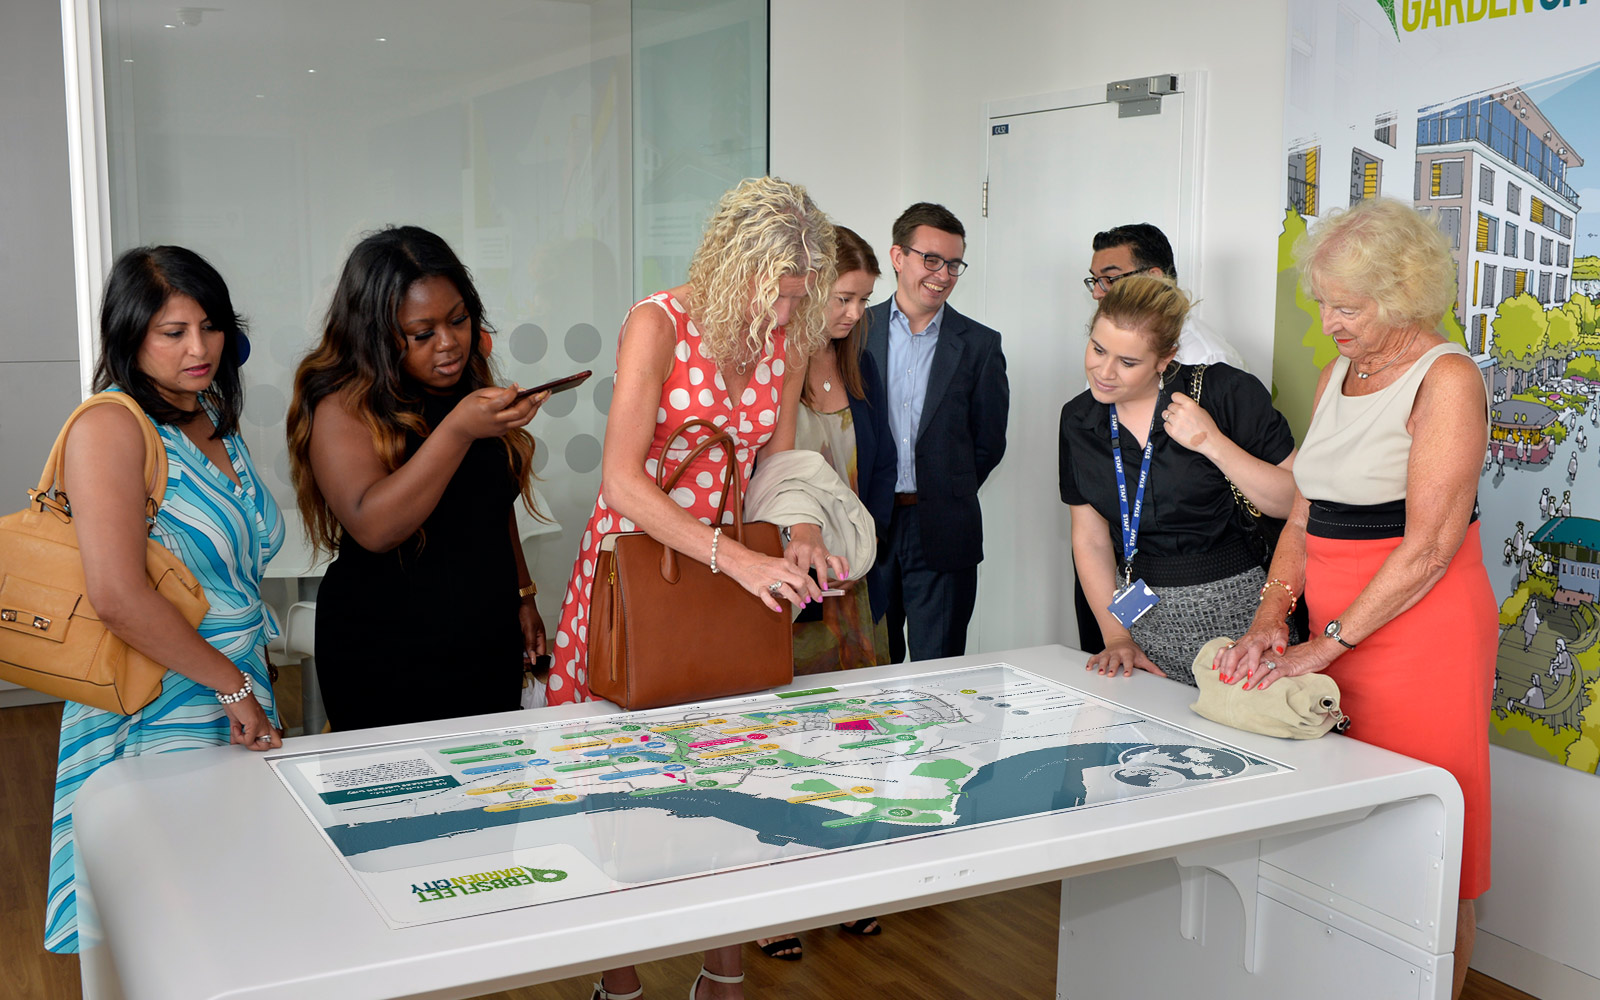 group of people smiling and interacting with ebbsfleet touchscreen display on white table in office